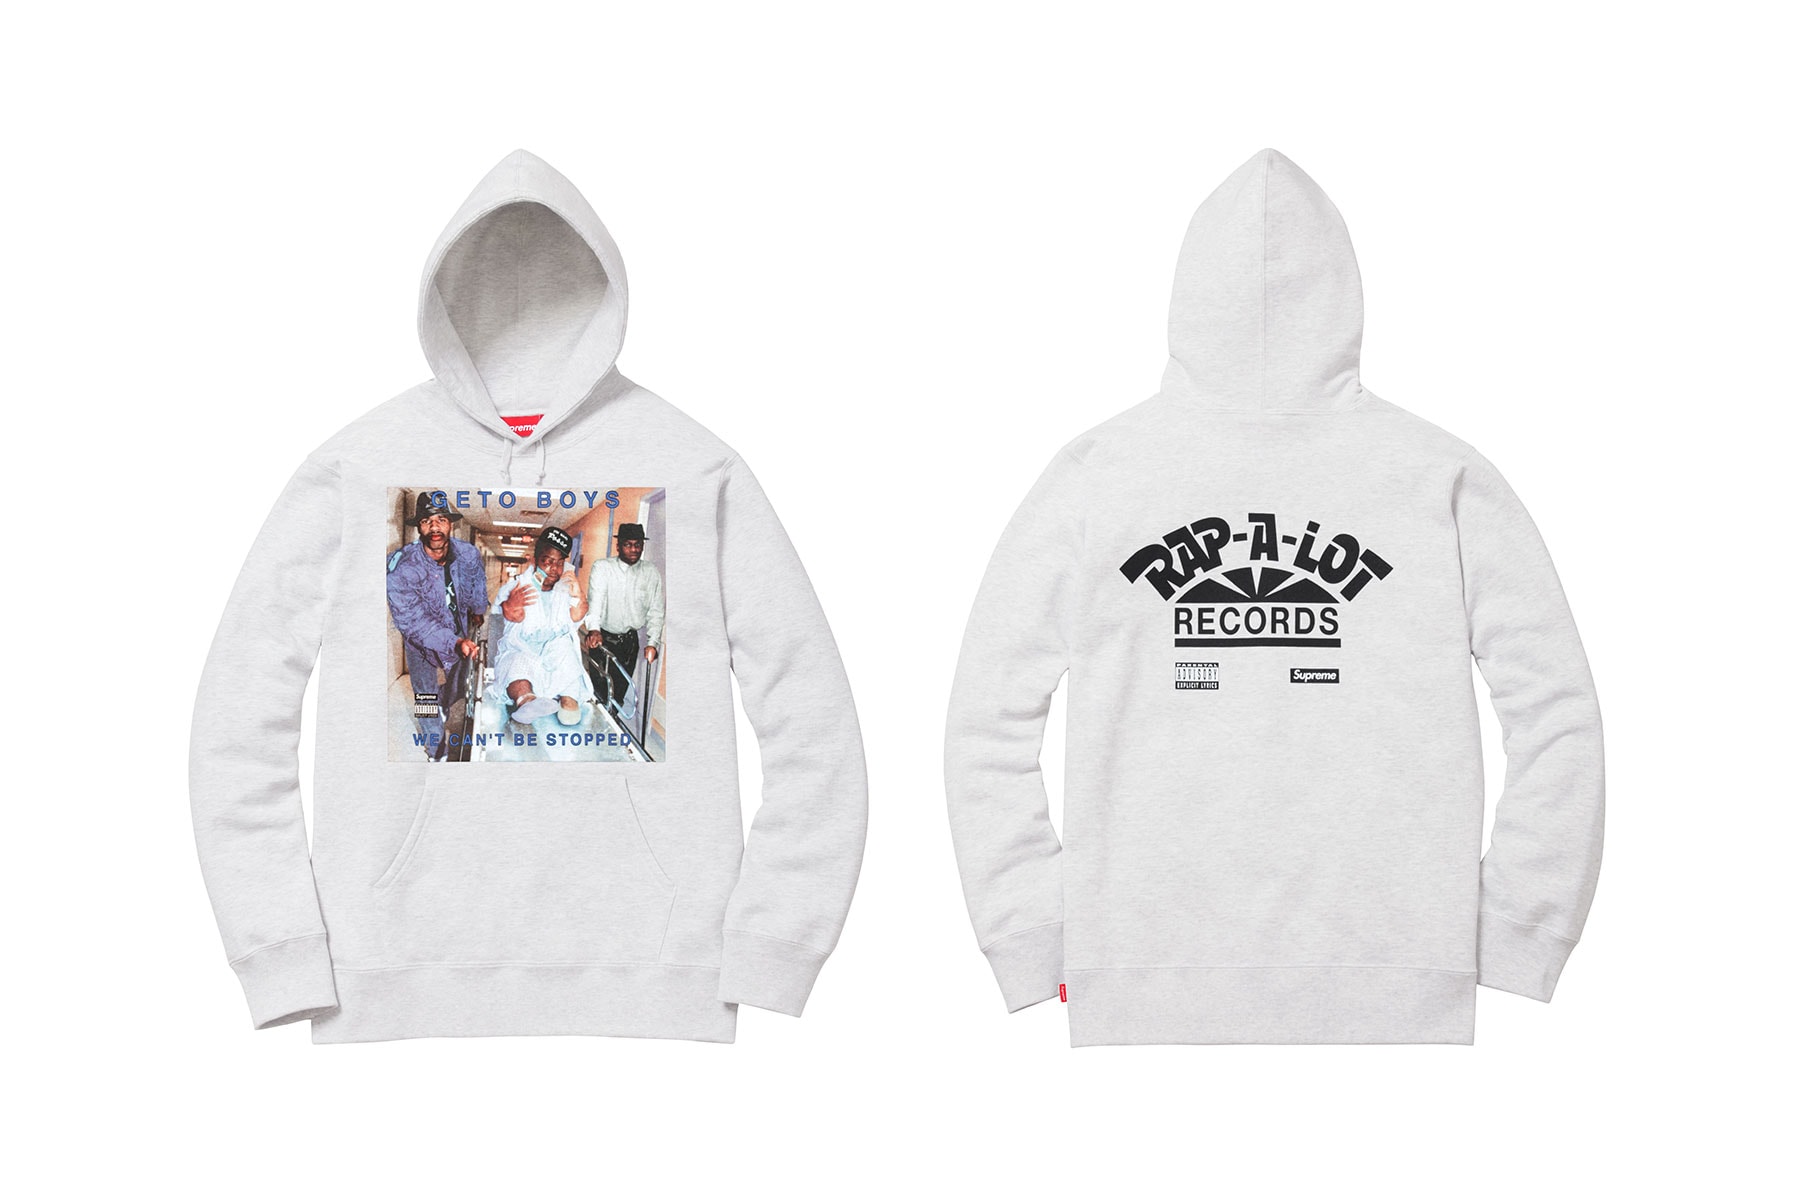 Supreme x Rap-A-Lot Records 2017 Spring/Summer Collection